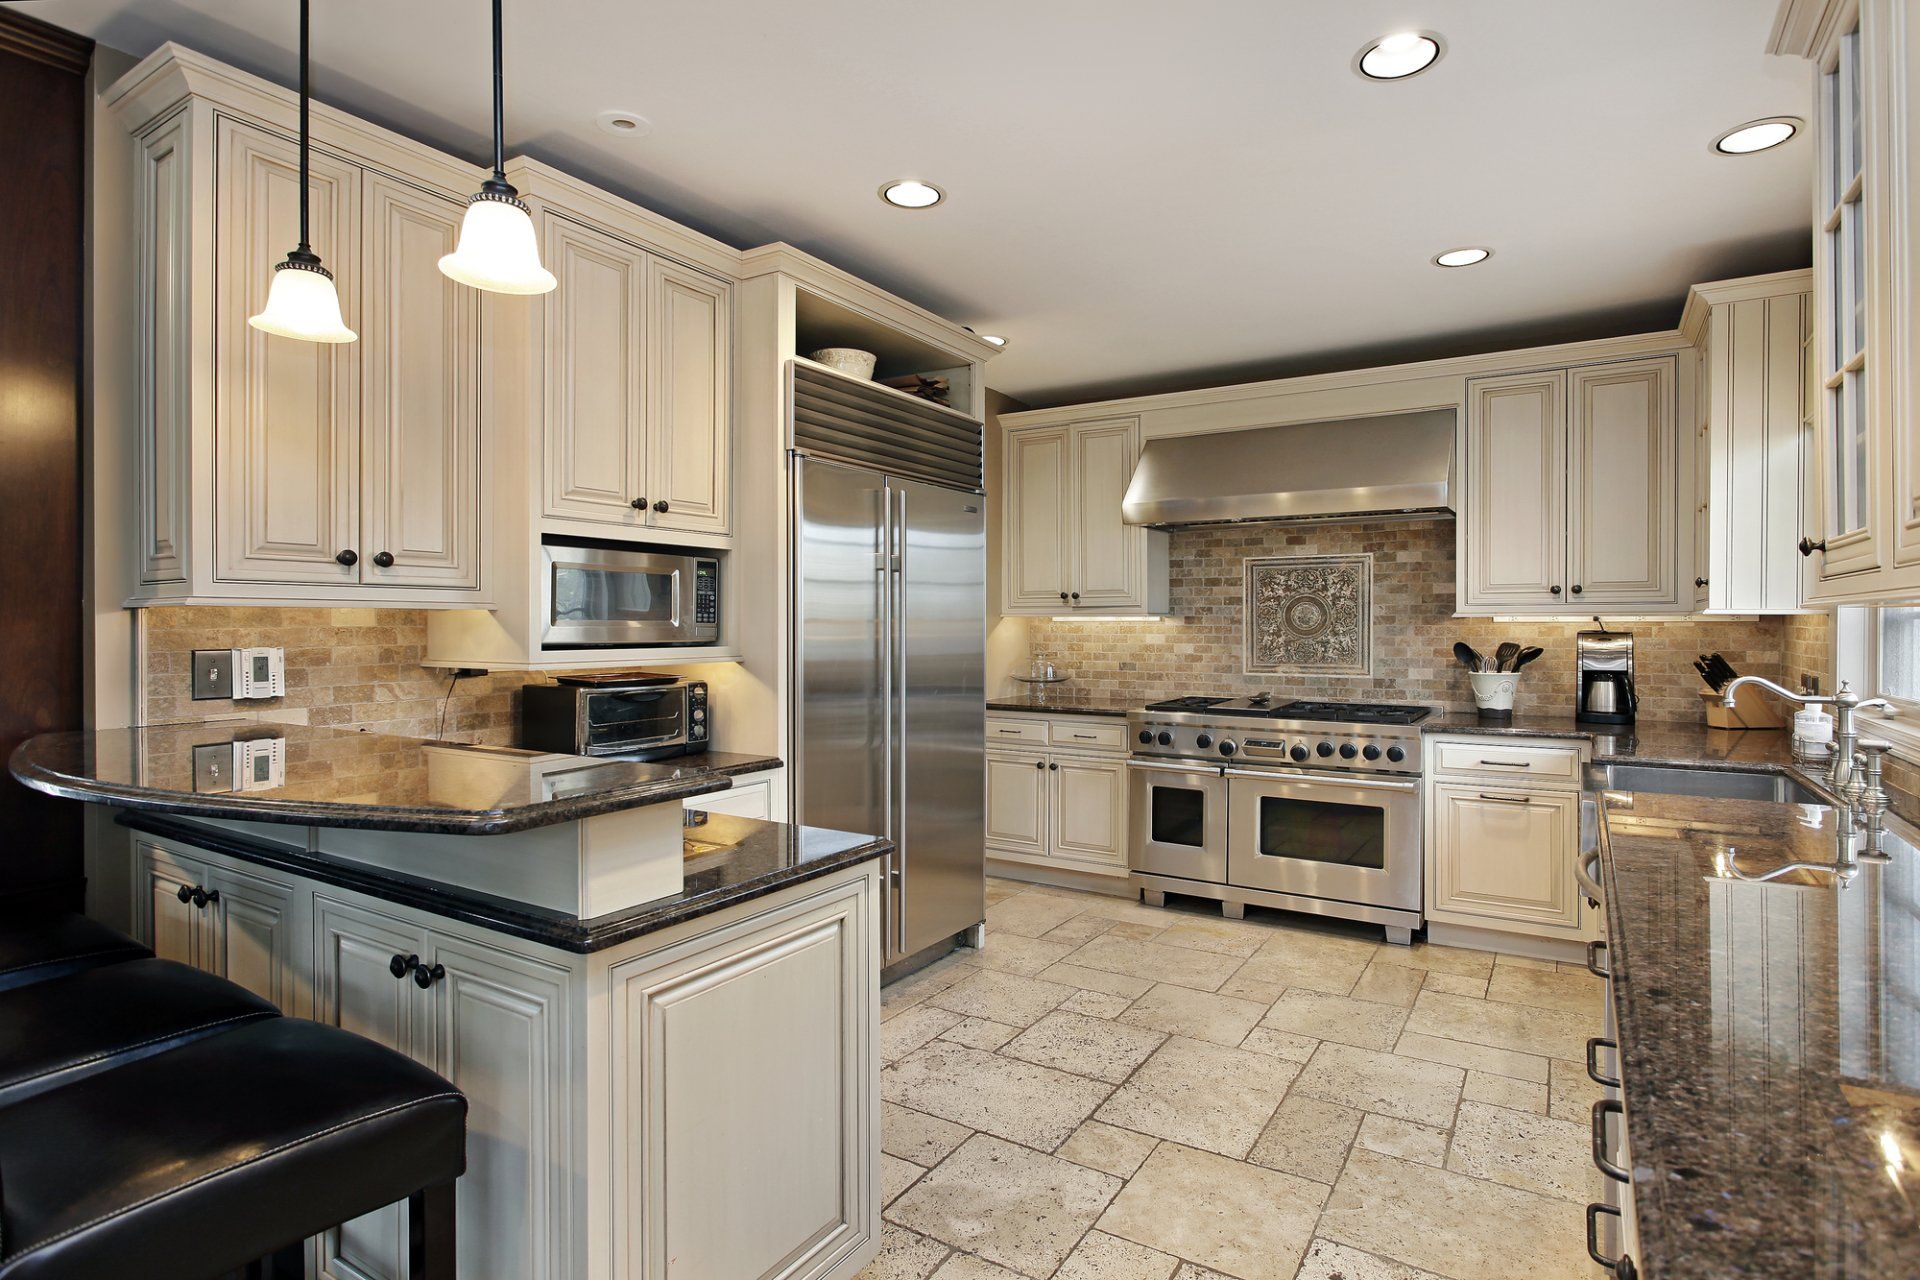 Kitchen Remodeling in Deerfield, IL | All Quality, Inc.